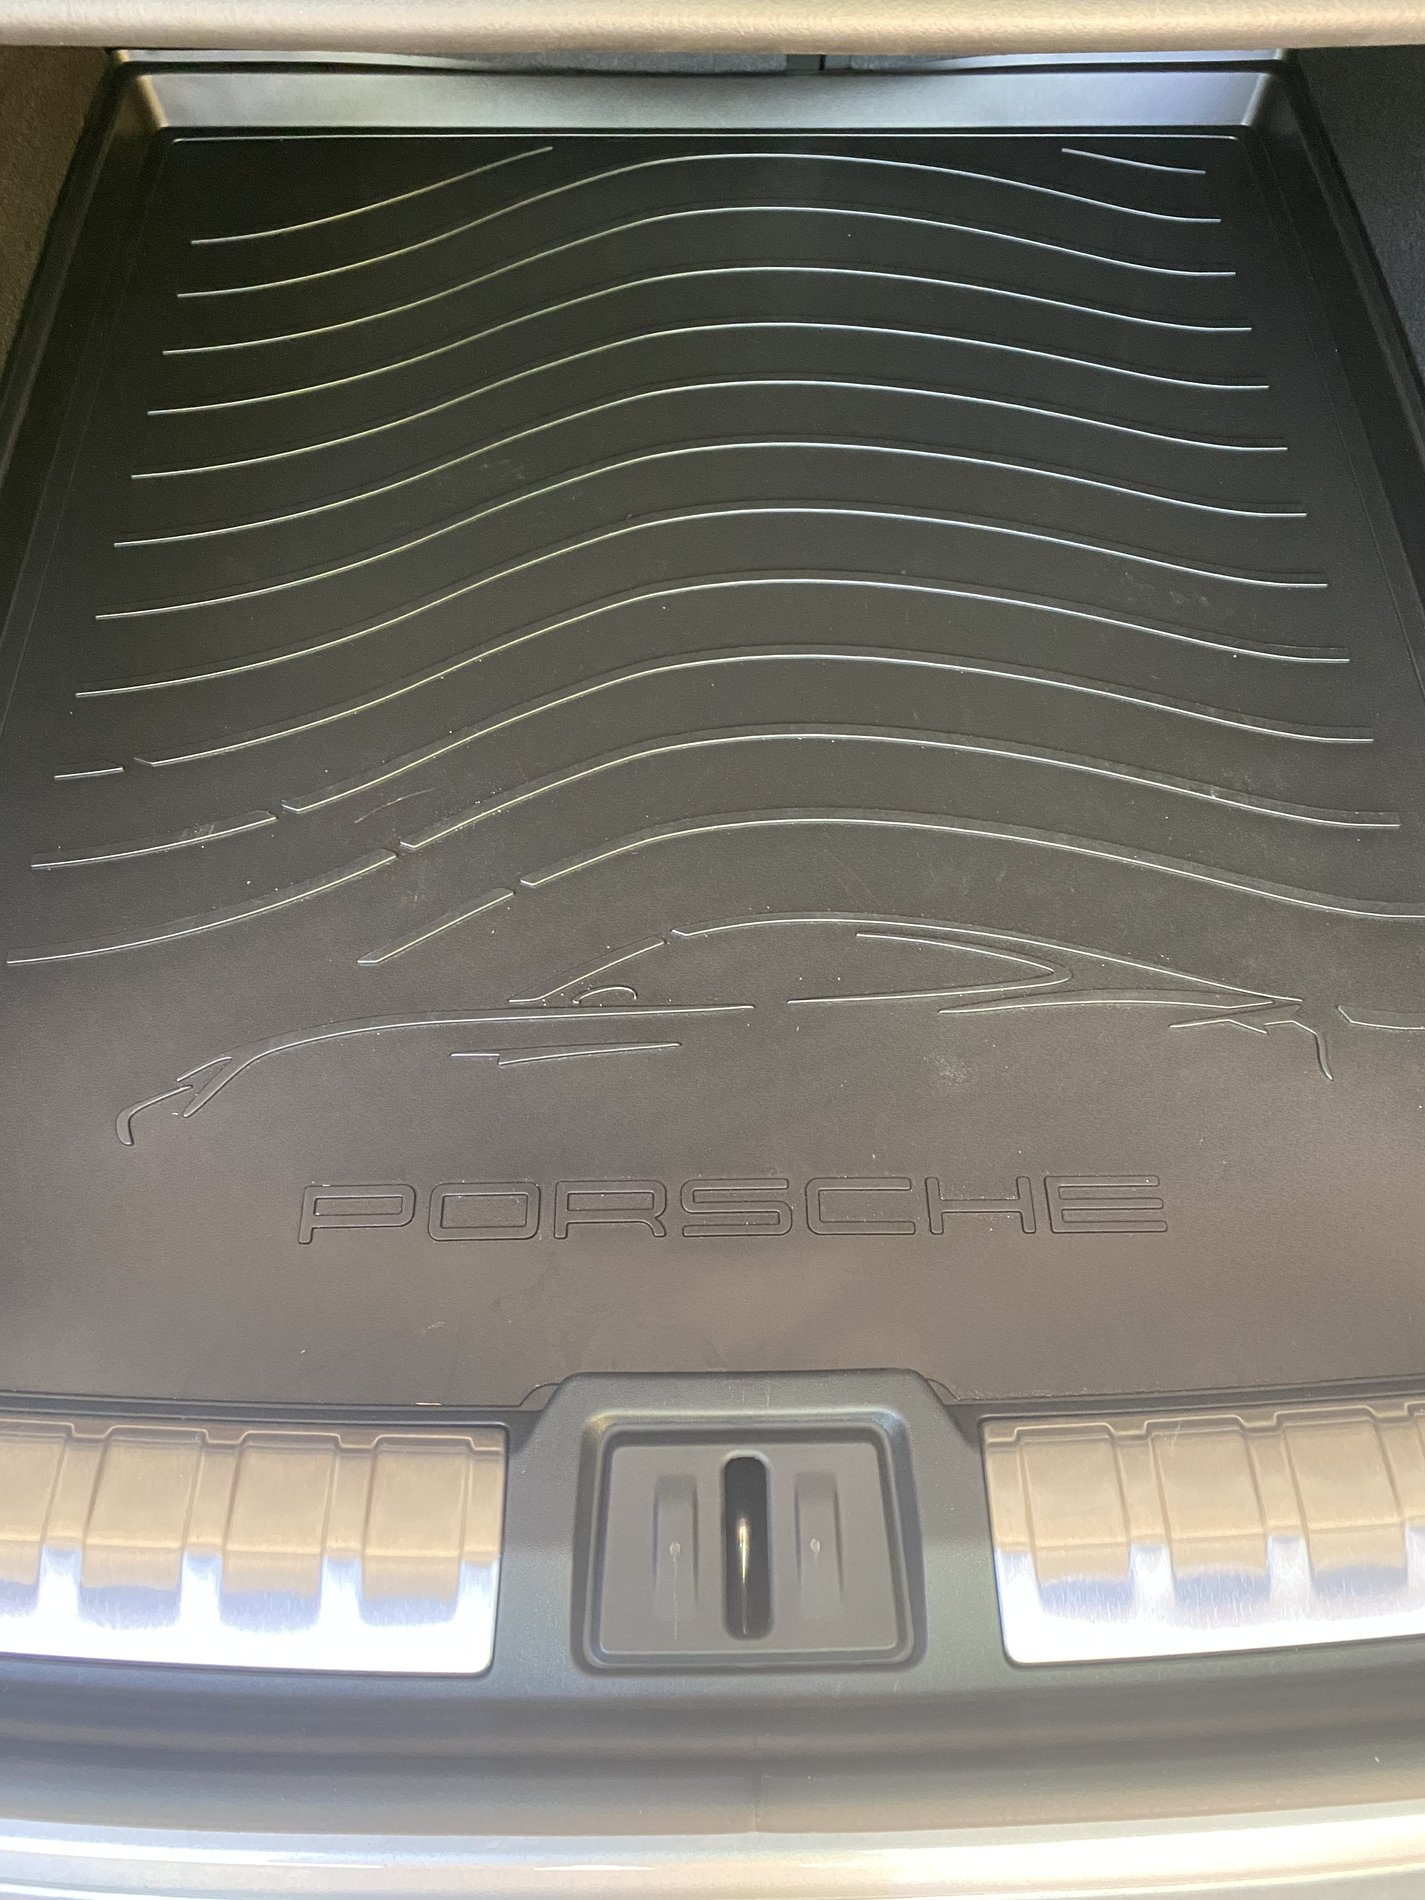 Porsche Taycan Installed clear side markers, trunk liner, WeatherTech mats and phone holder 28C00159-6D99-45B3-8118-94620808CA92